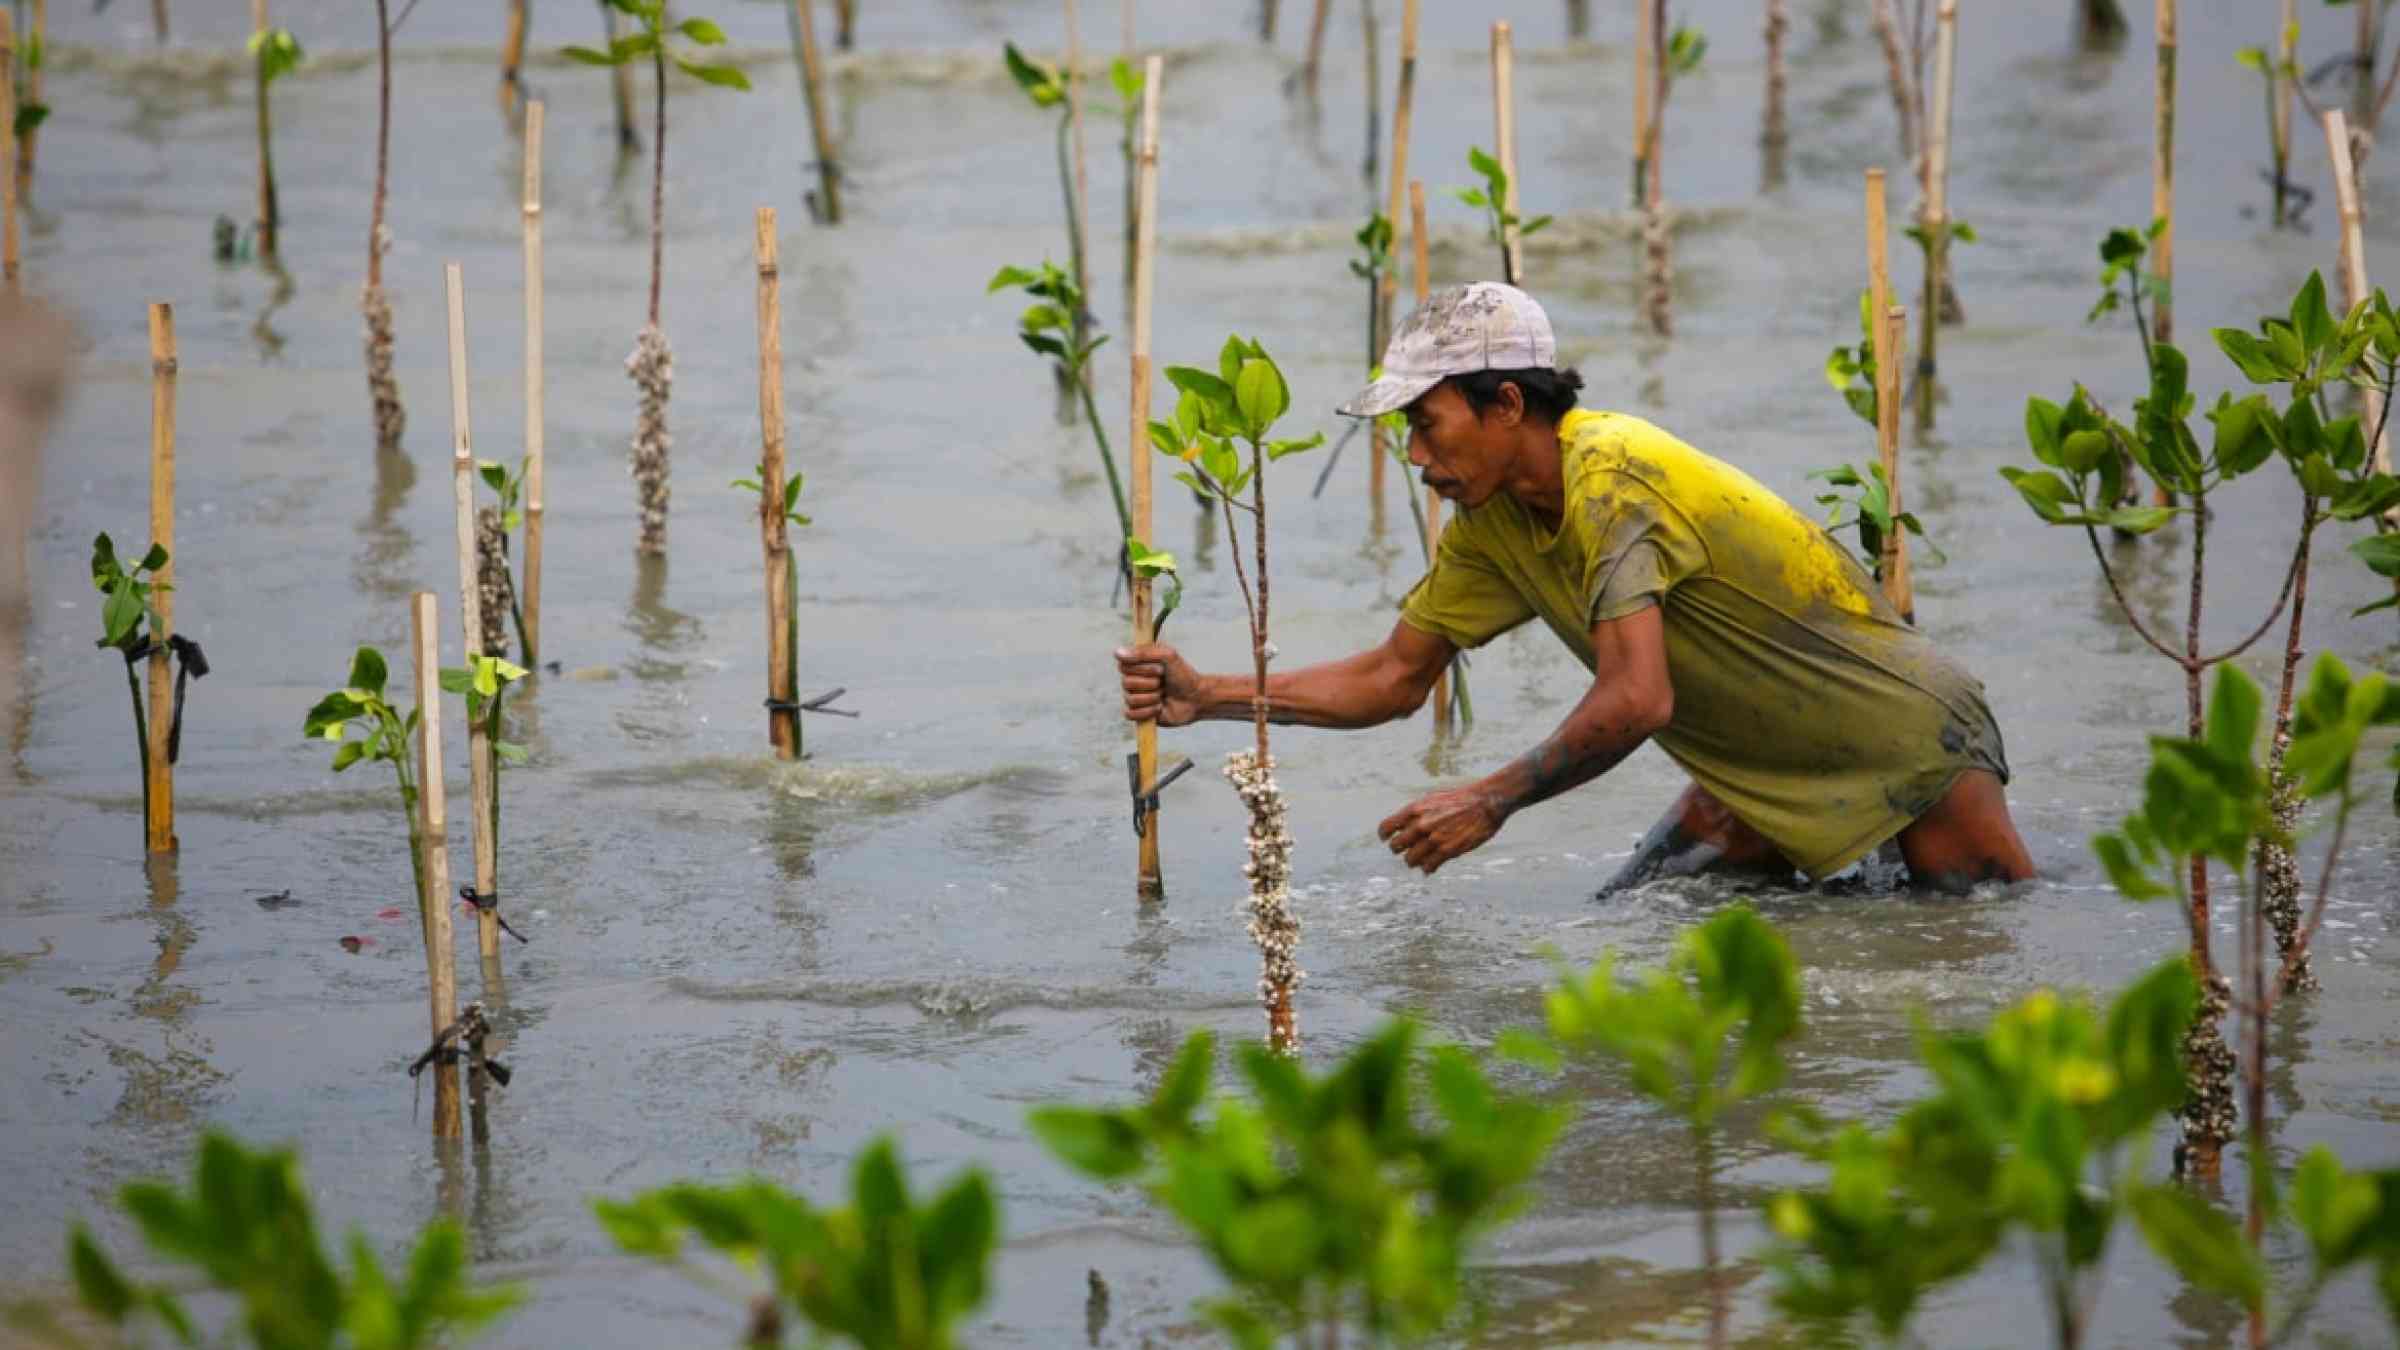 Man planting mangroves in the water in Indonesia.